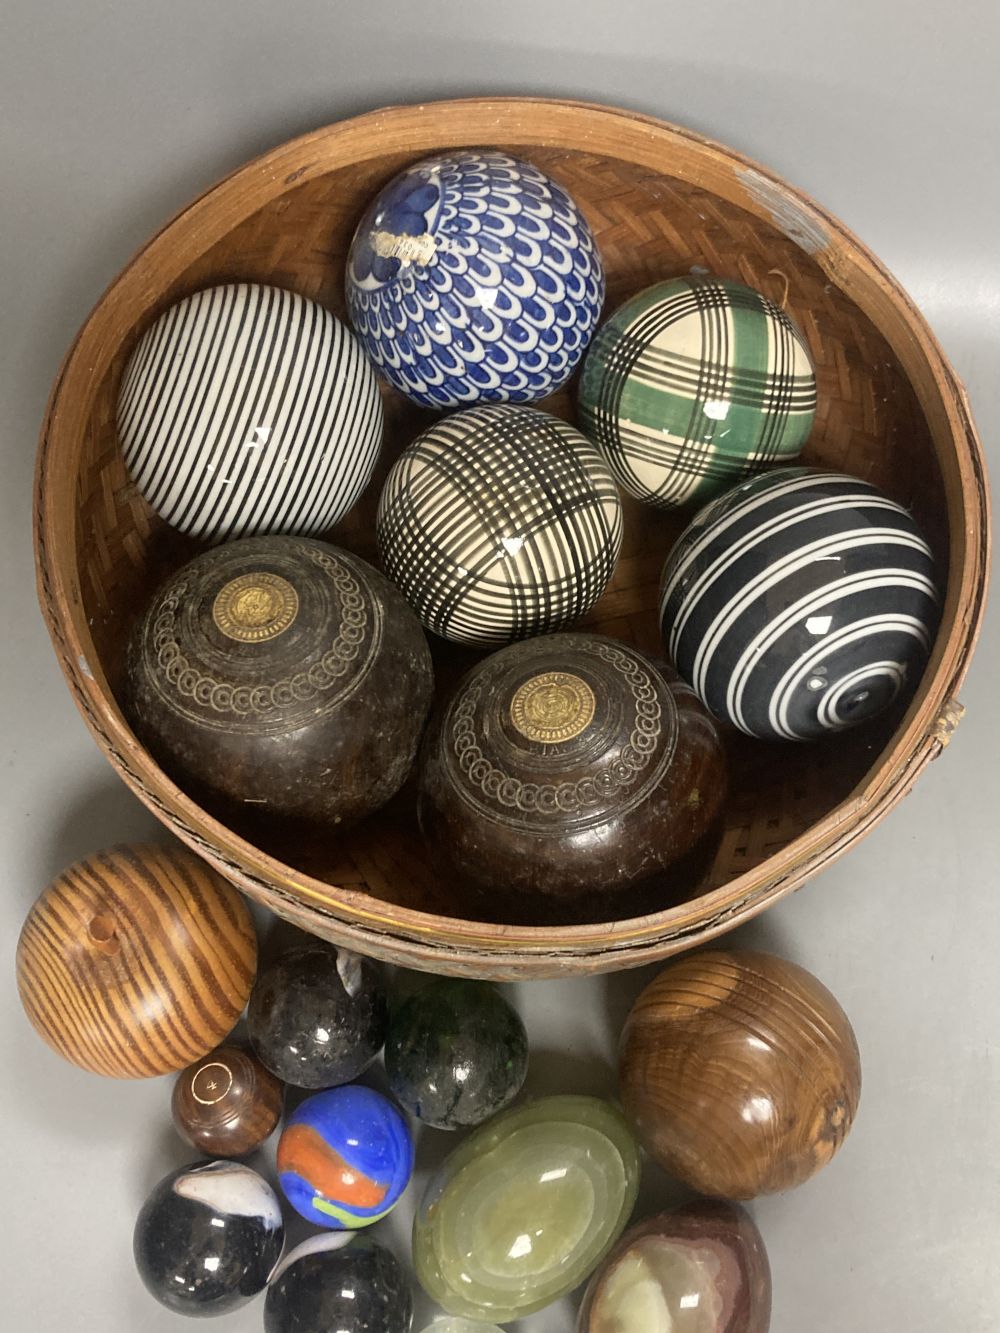 A collection of Scottish ceramic and other carpet bowls